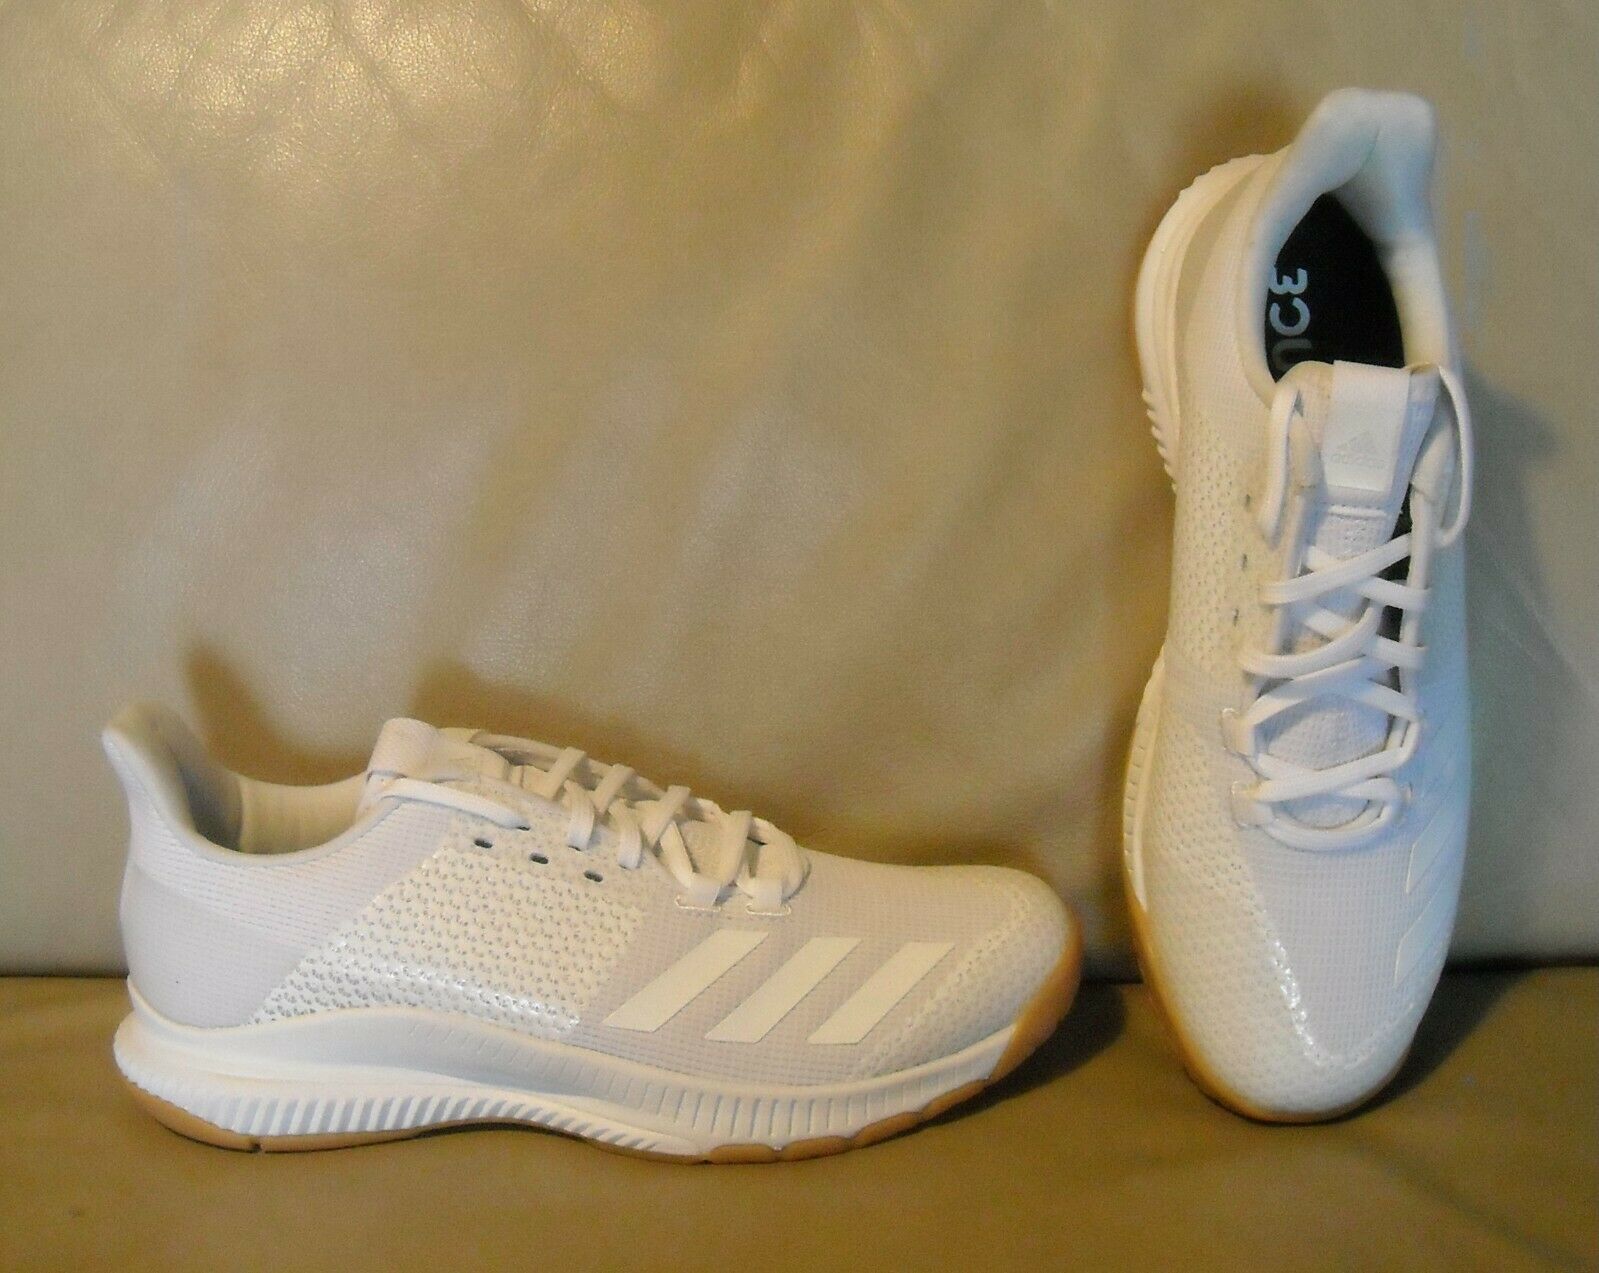 NWOB Women's Adidas Crazy Flight Bounce Volleyball Shoes Size 8 White BD7906